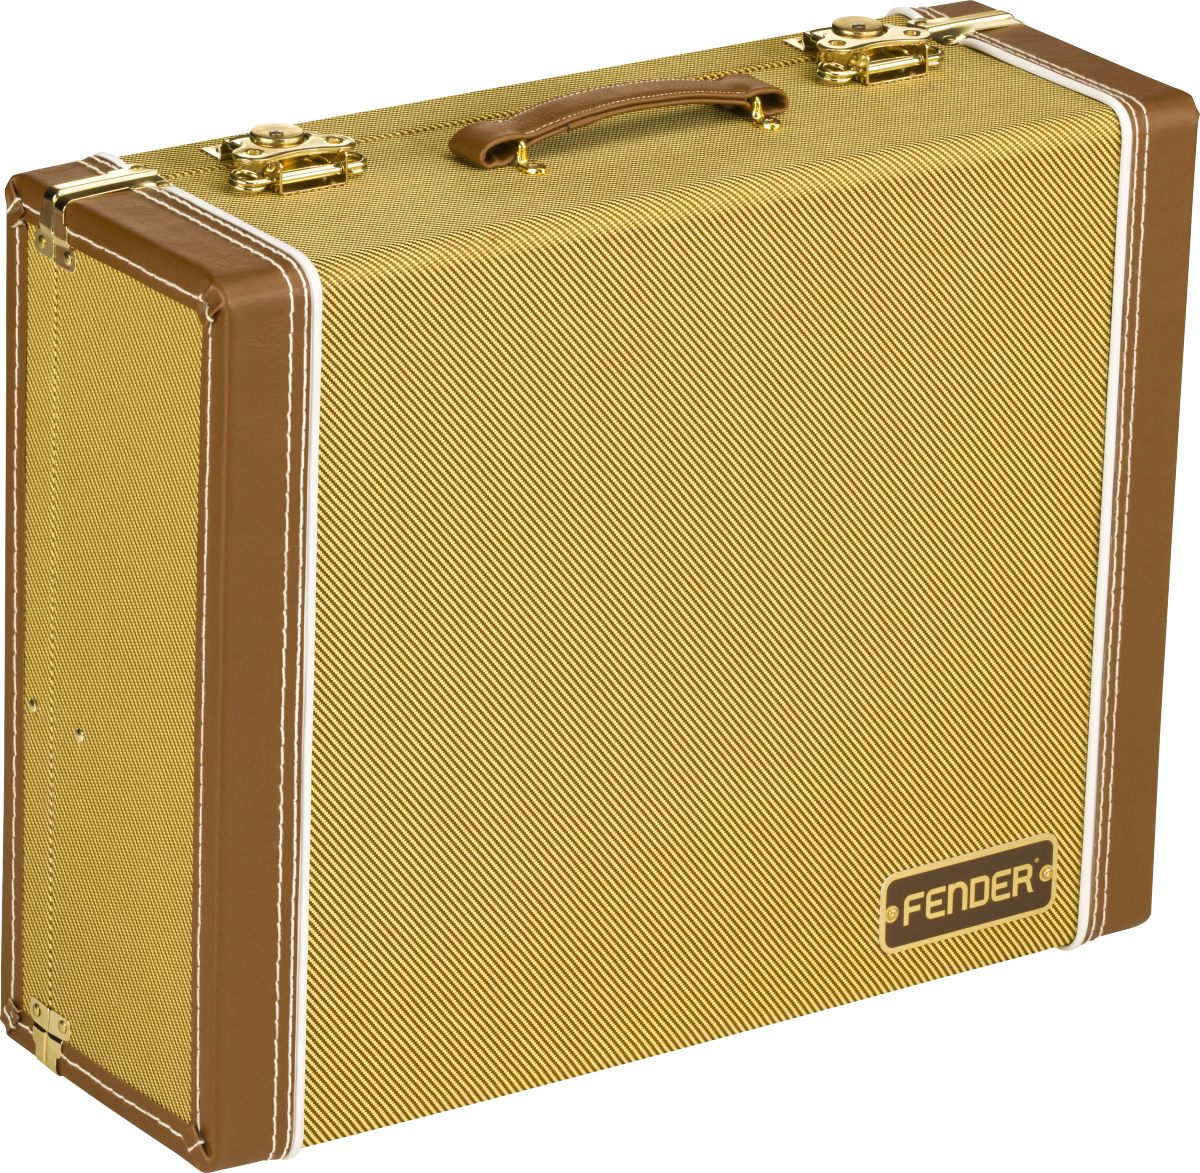 Fender Tweed Pedal Case, Small